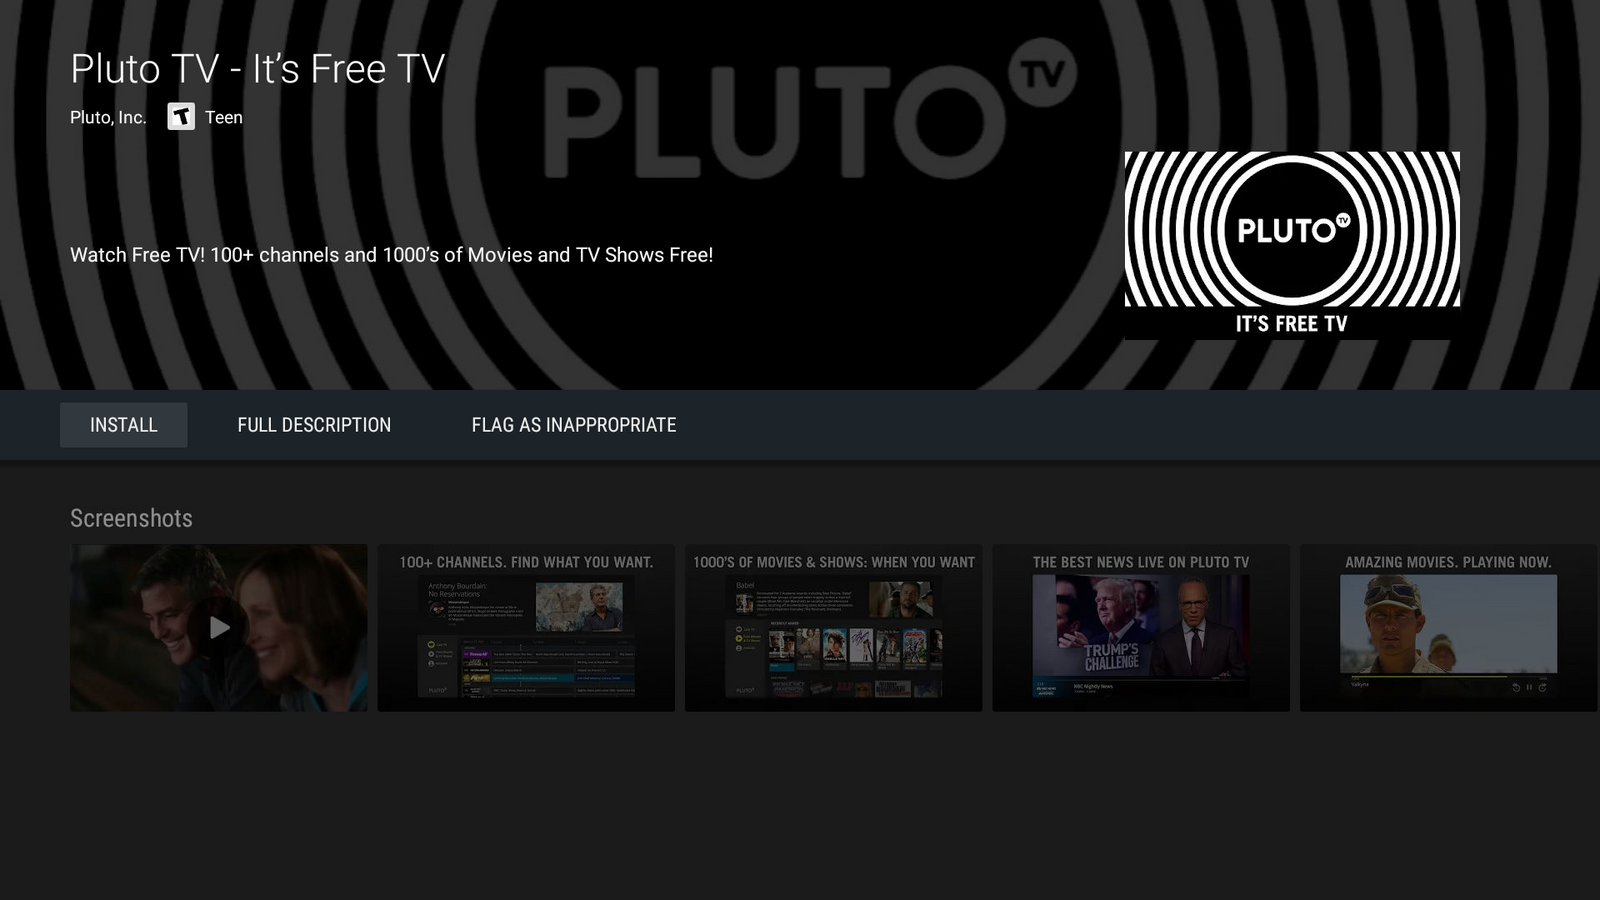 Pluto Tv Is The Best Free Live Tv Streaming Application Skystream Streaming Media Players Stream Movies Tv Shows Sports